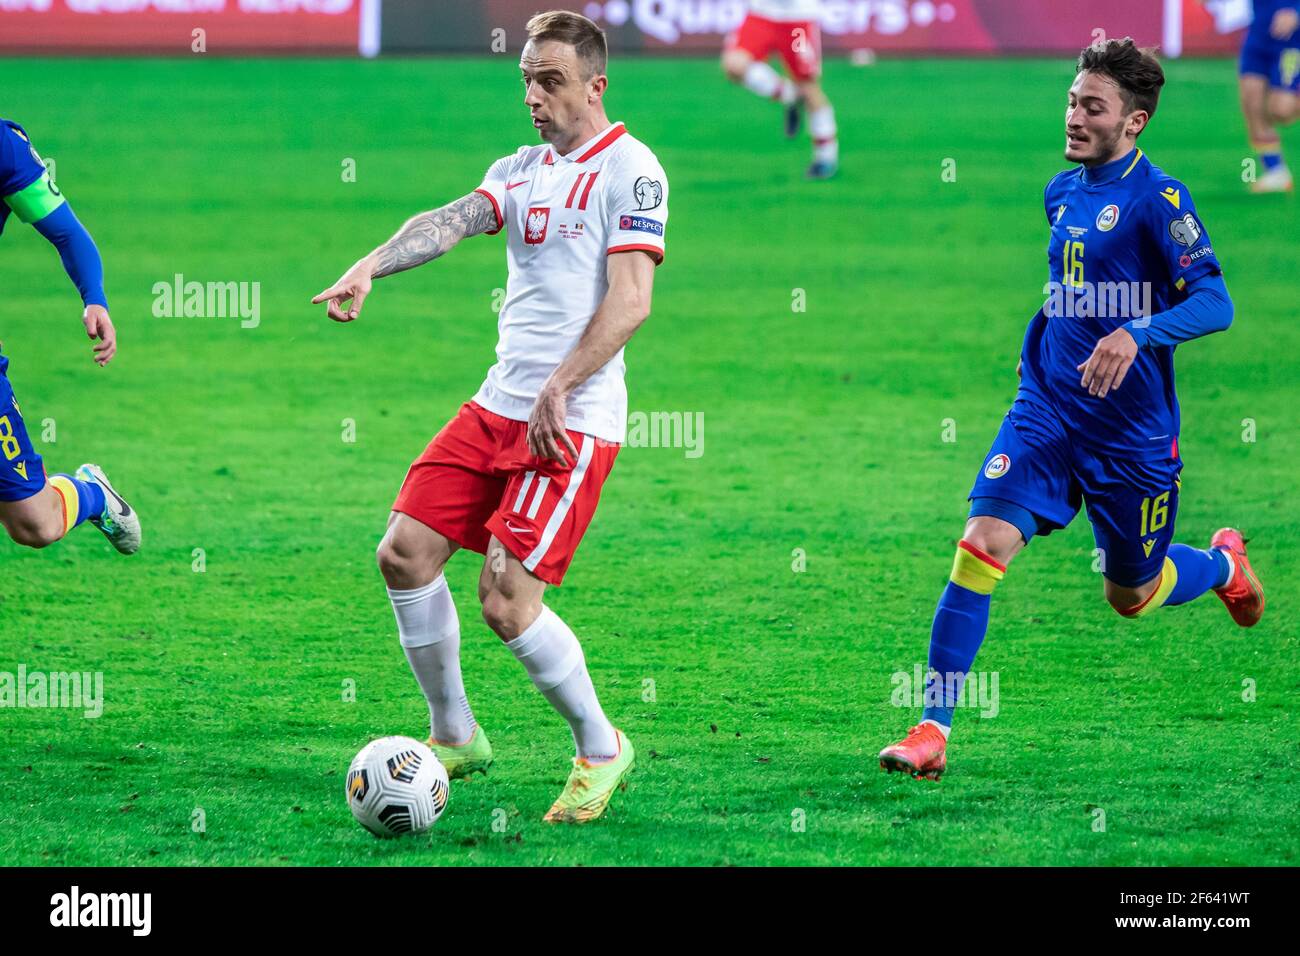 Kamil Grosicki of Poland and Alex Martinez, of Andorra in action during the FIFA World Cup 2022 Qatar qualifying match between Poland and Andorra at Marshal Jozef Pilsudski Legia Warsaw Municipal Stadium. (Final score; Poland 3:0 Andorra) Stock Photo